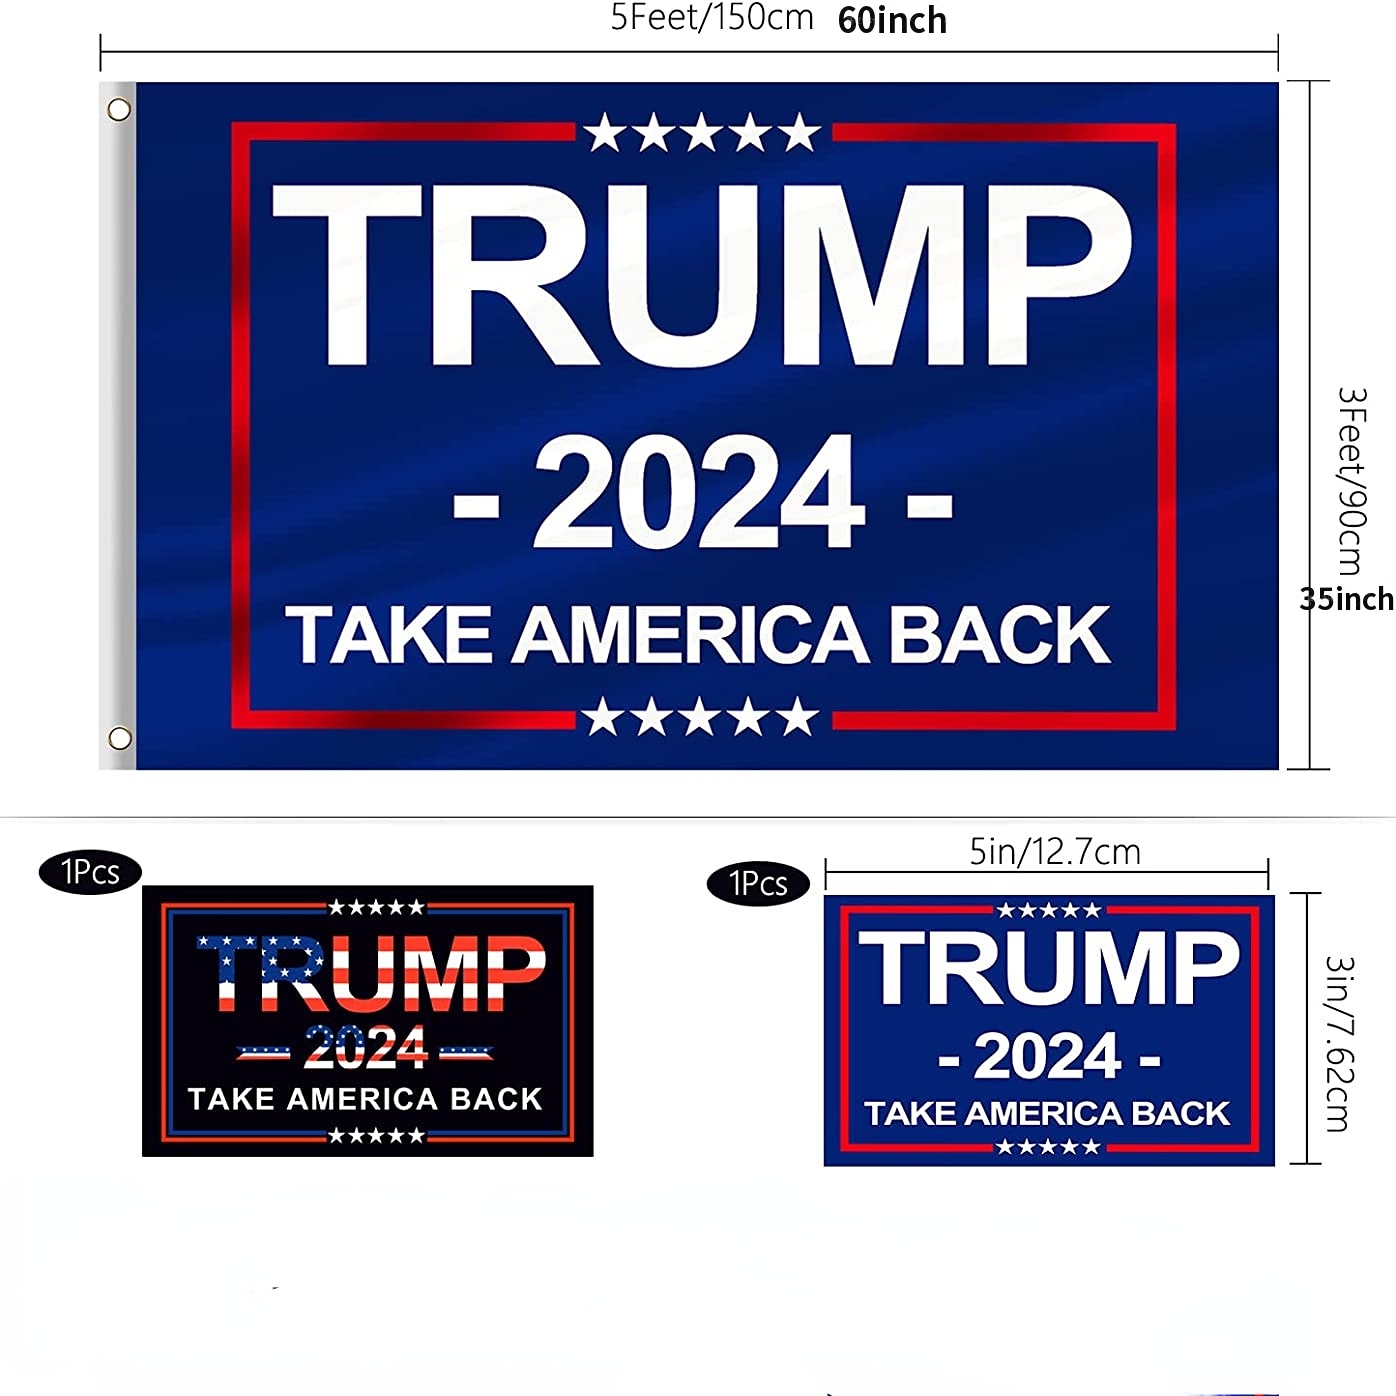 1pc politics flag 3x5ft with grommets trump 2024 take america back slogan flag presidential election flag american flag home decor room decor outdoor decor for party decor anniversary party favor activities decoration details 4